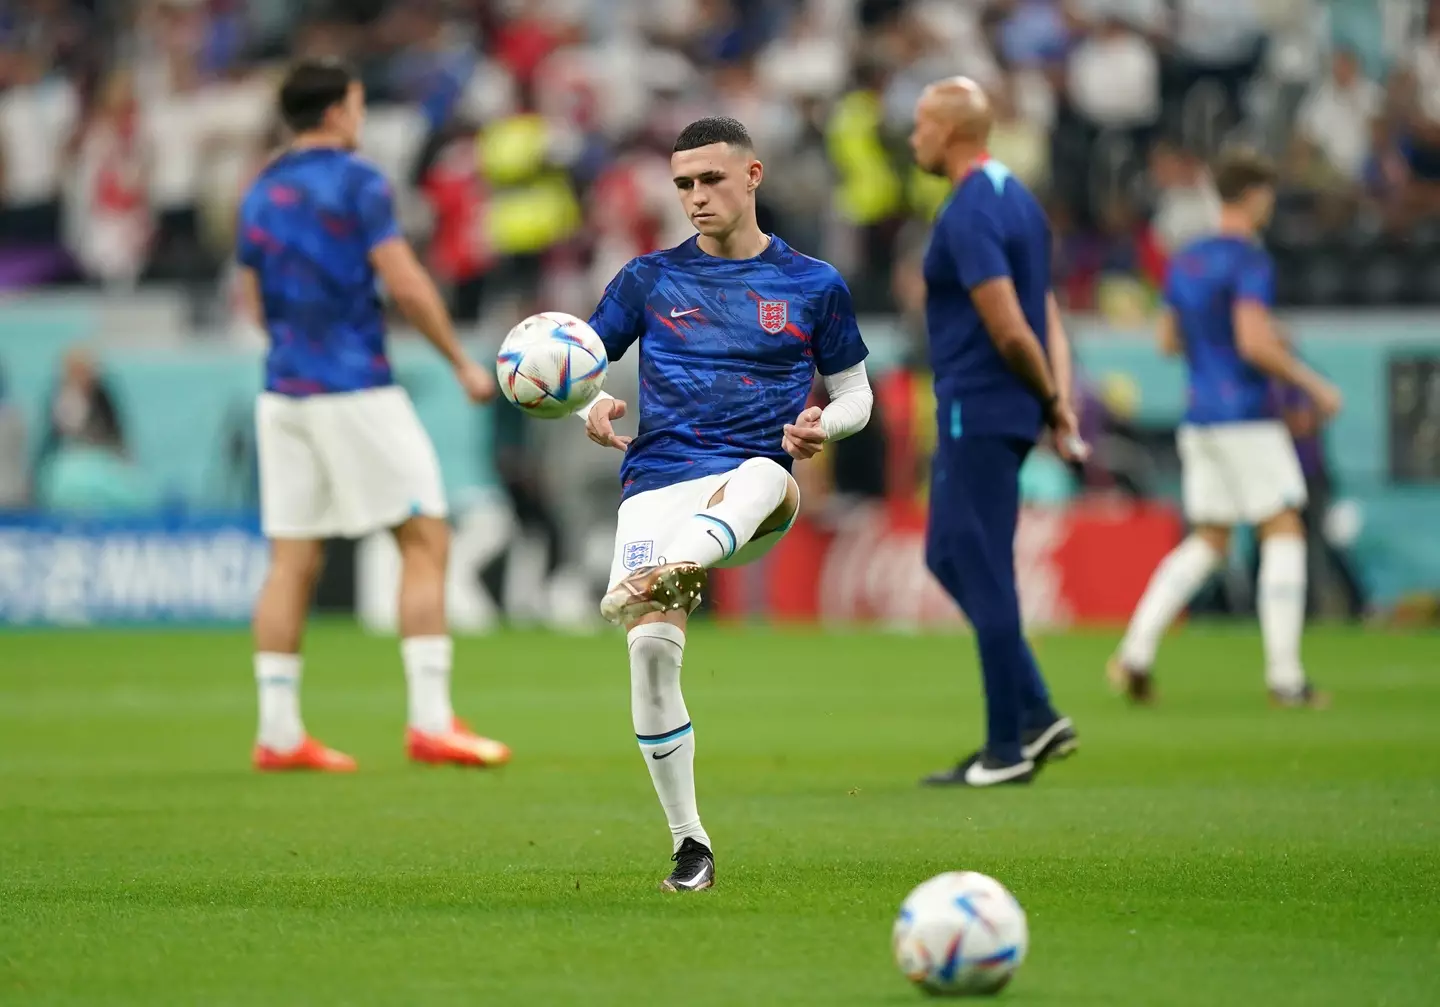 Foden in the warm-up. (Image